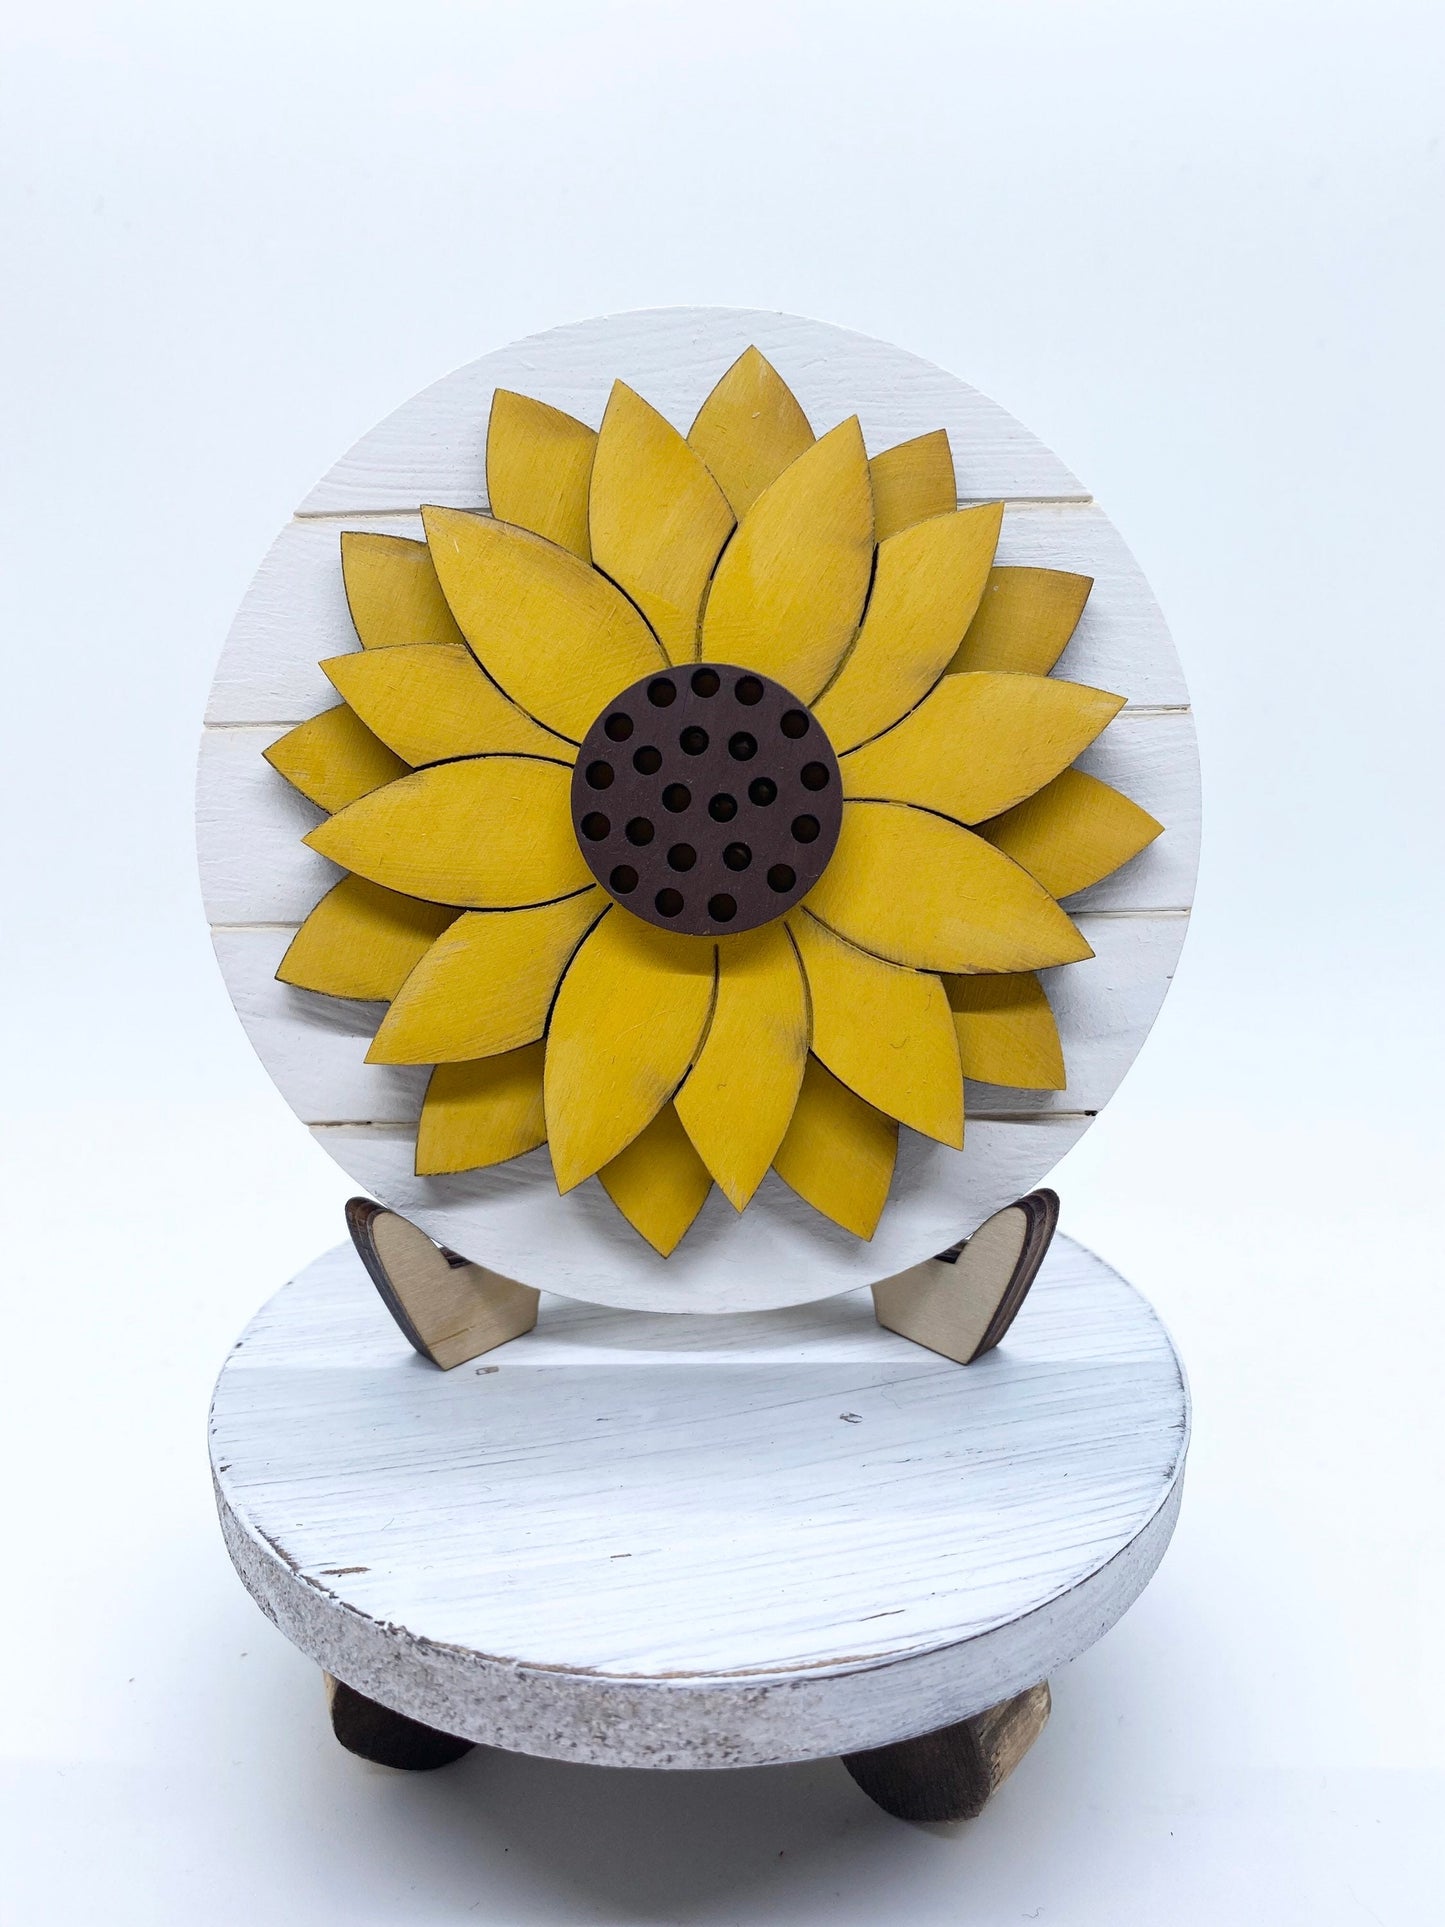 Sunflower Tiered Tray Sign, Mini Shiplap Sunflower Tray Sign, Sunflower Tiered Tray Decor, 4” Round Tiered Tray Sign with Sunflower